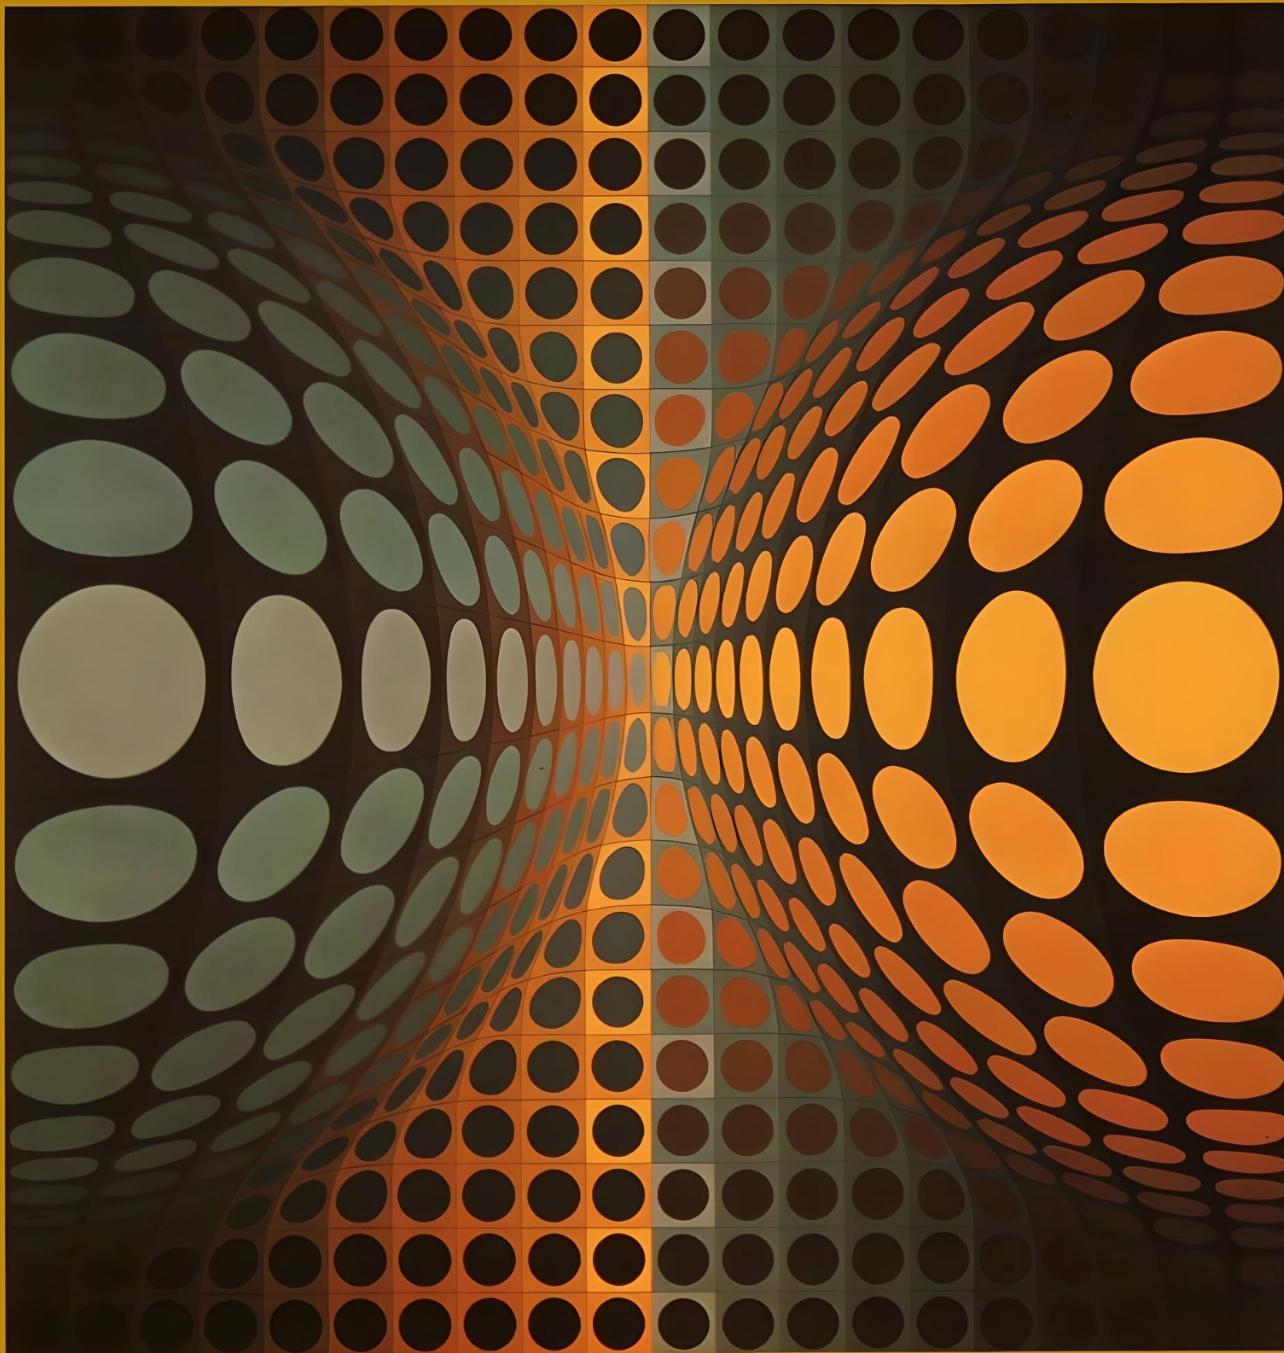 Vasarely, Composition, VEGA (after) - Print by Victor Vasarely